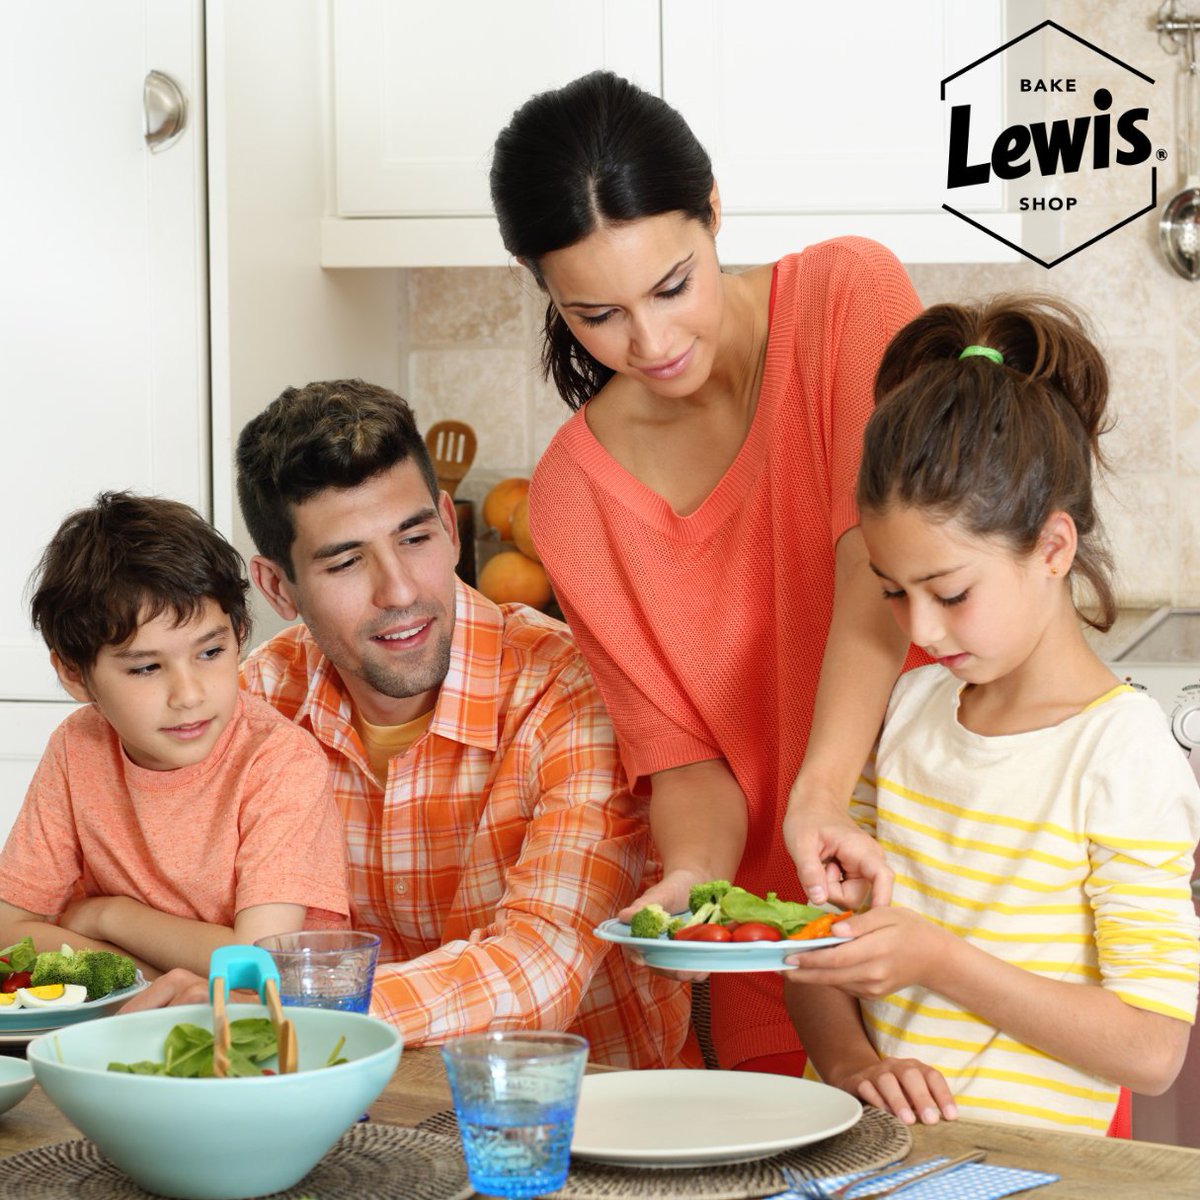 May is #FamilyWellness Month, and cooking together is a great way to incorporate healthy foods into your meals.